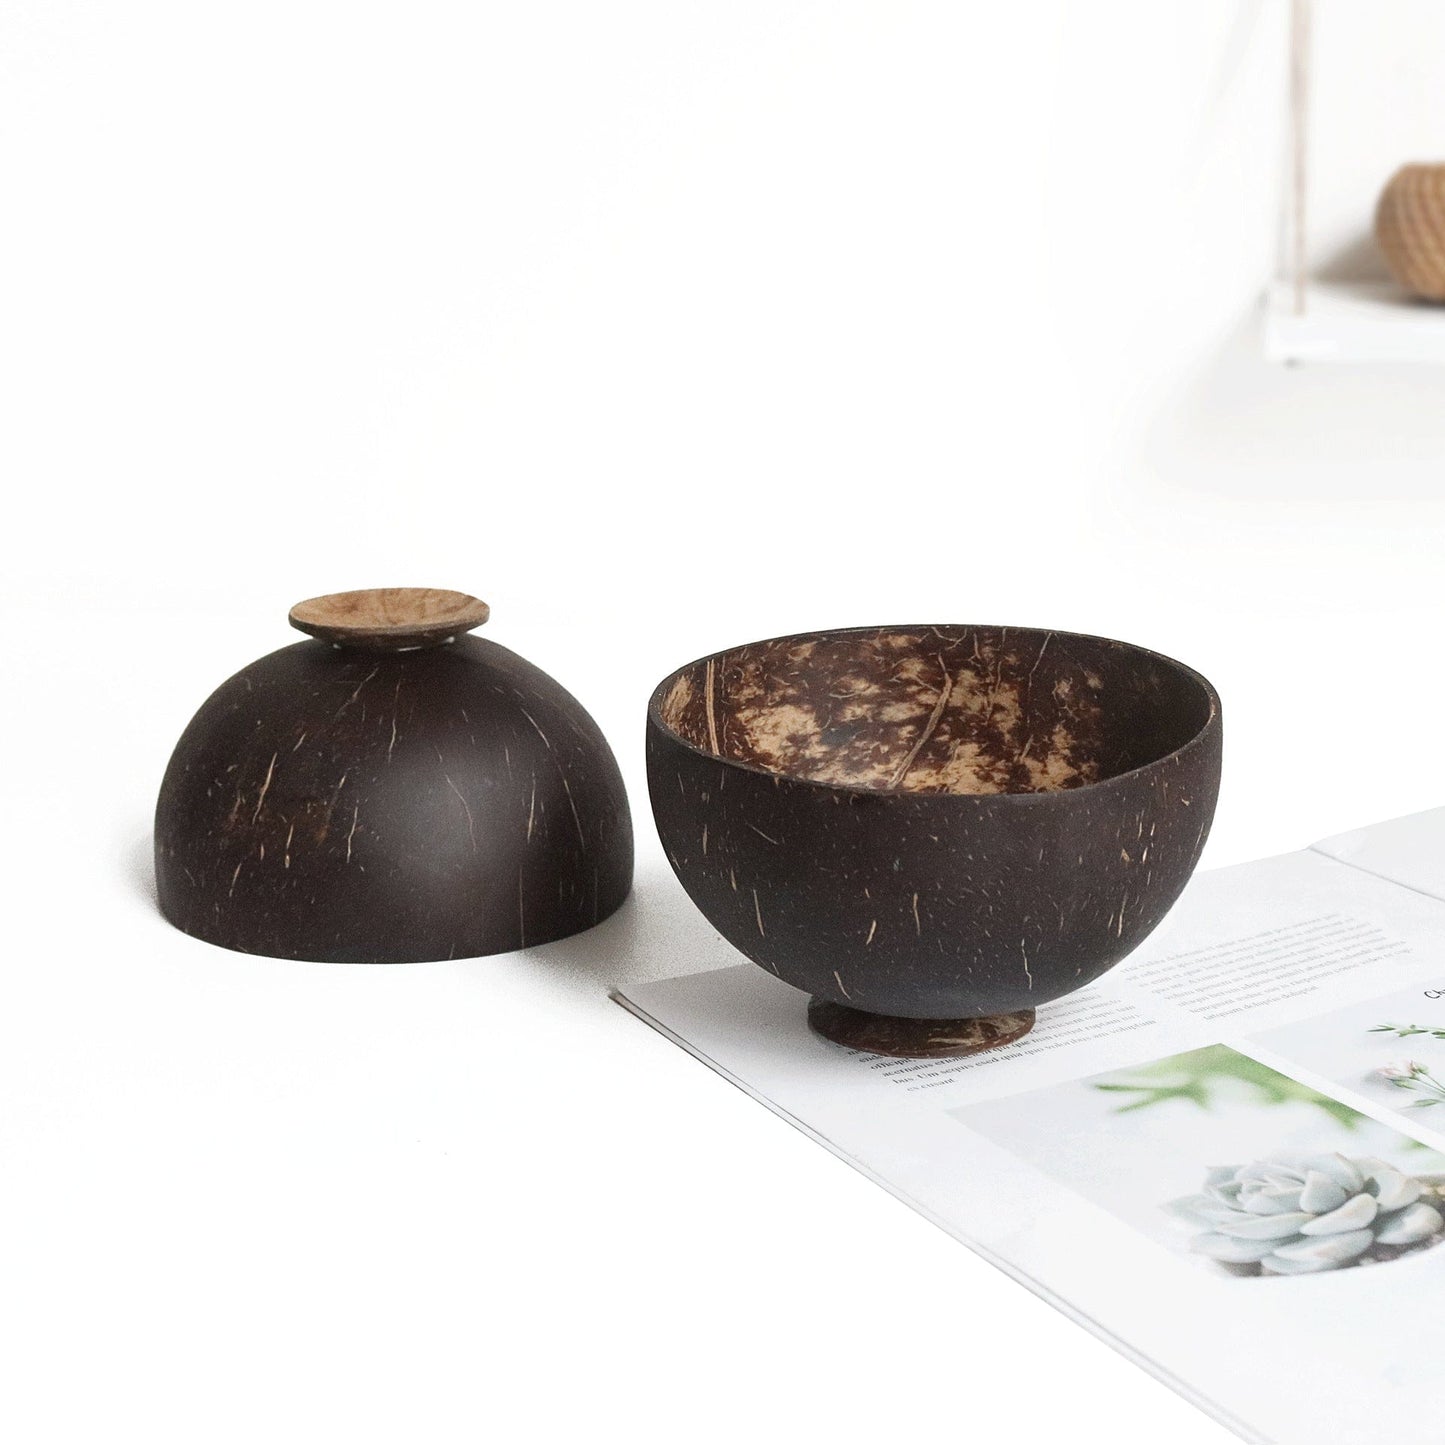 Natural coconut shell bowlOld coconut shell bowlCoconut shell bowlCoconut shell tablewareRice bowlDessert containerFruit salad bowl